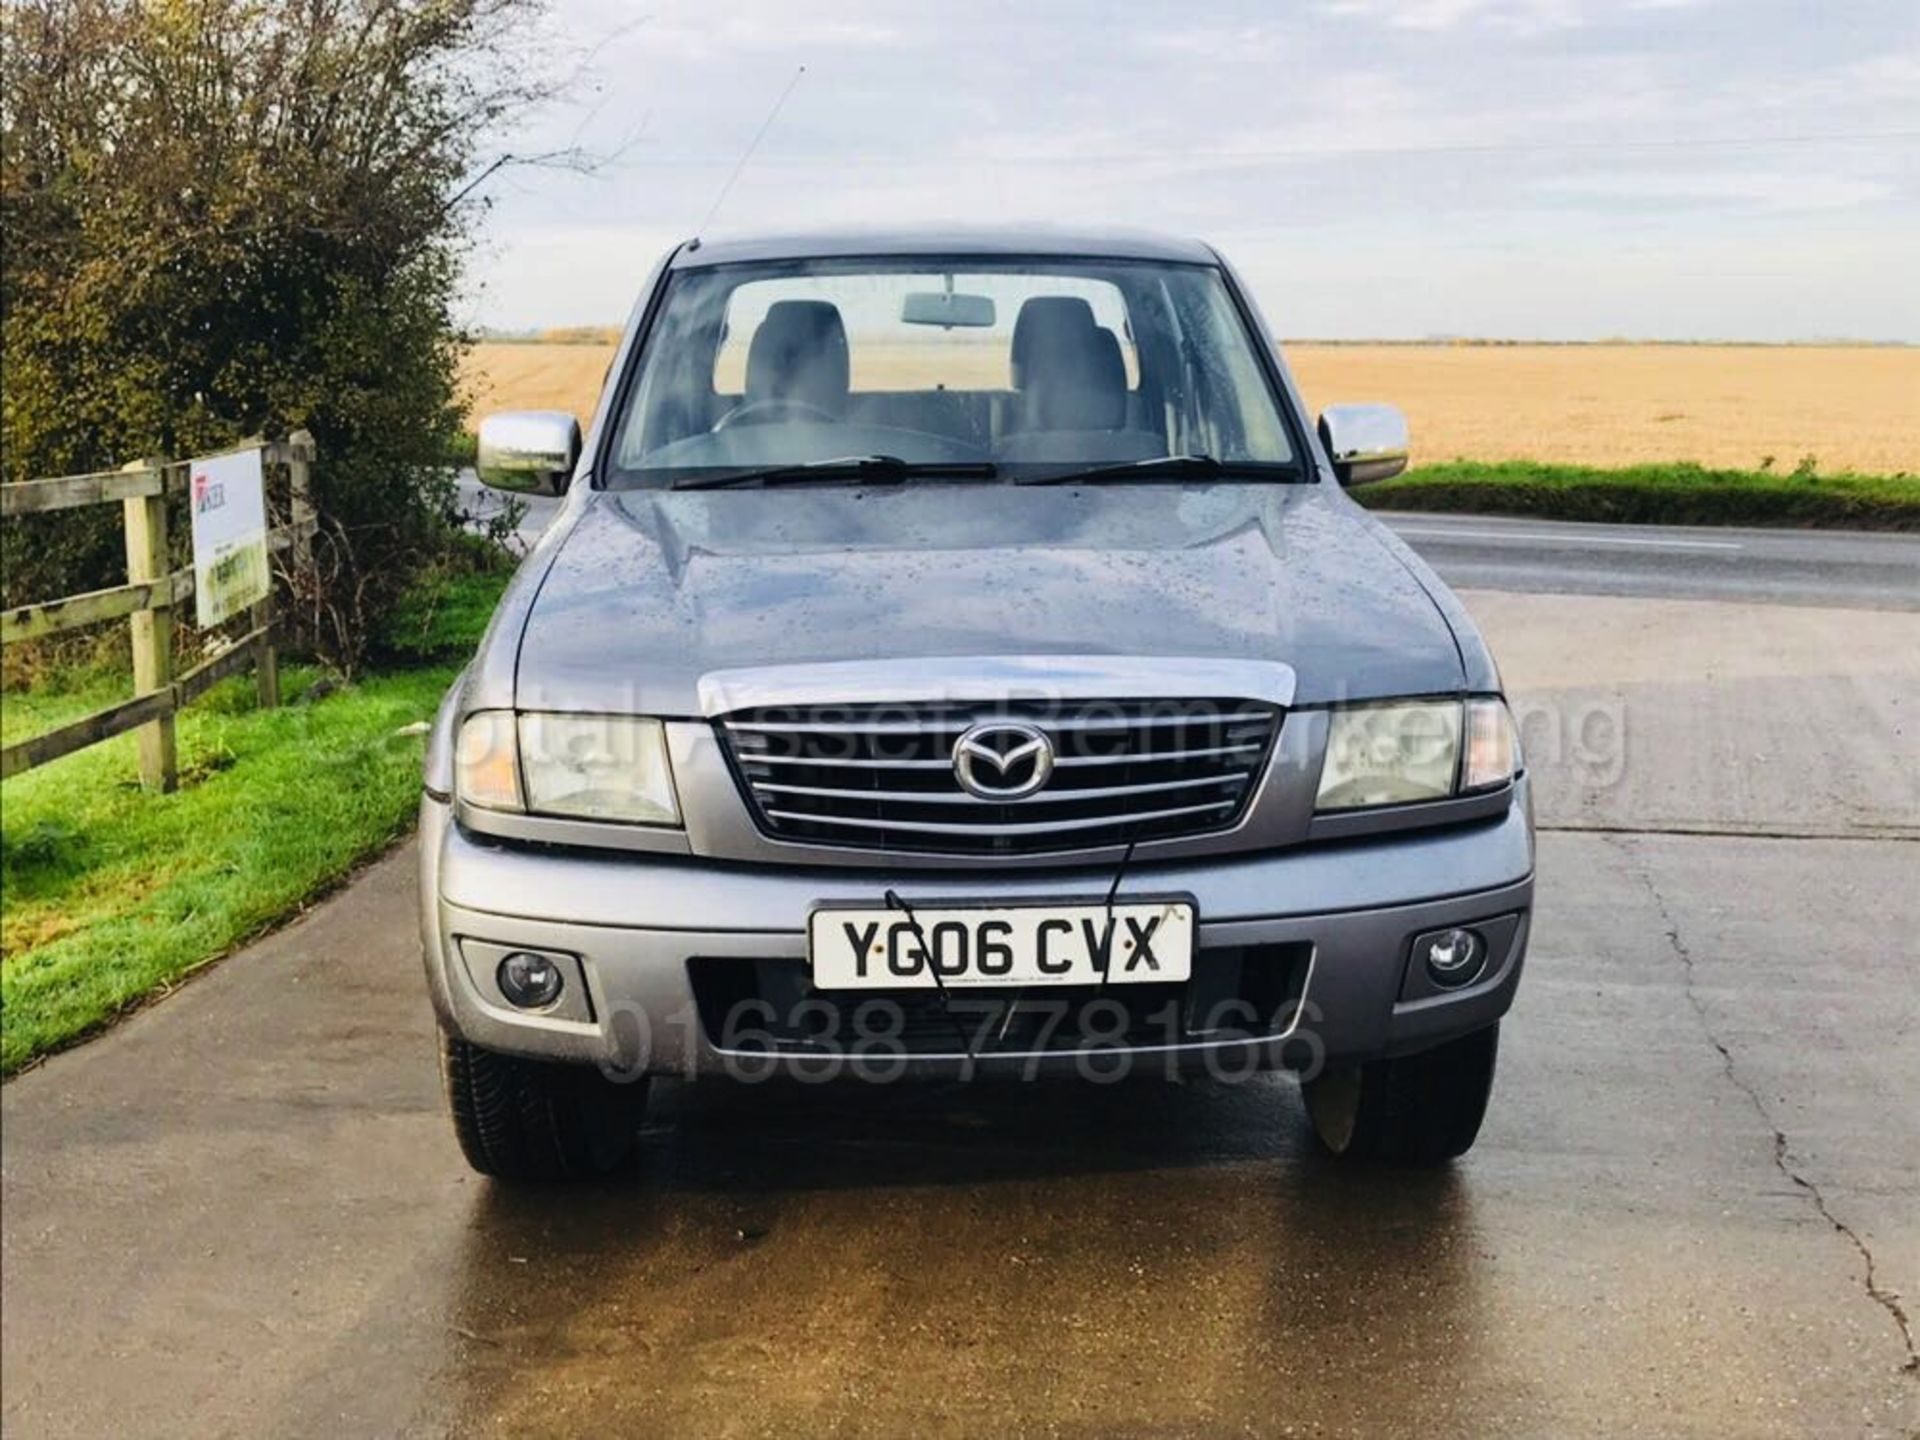 MAZDA B2500 '4-STYLE DOUBLE CAB PICK-UP' (2006 - 06 REG) '2.5 DIESEL - 109 BHP' *AIR CON* (NO VAT) - Image 2 of 18